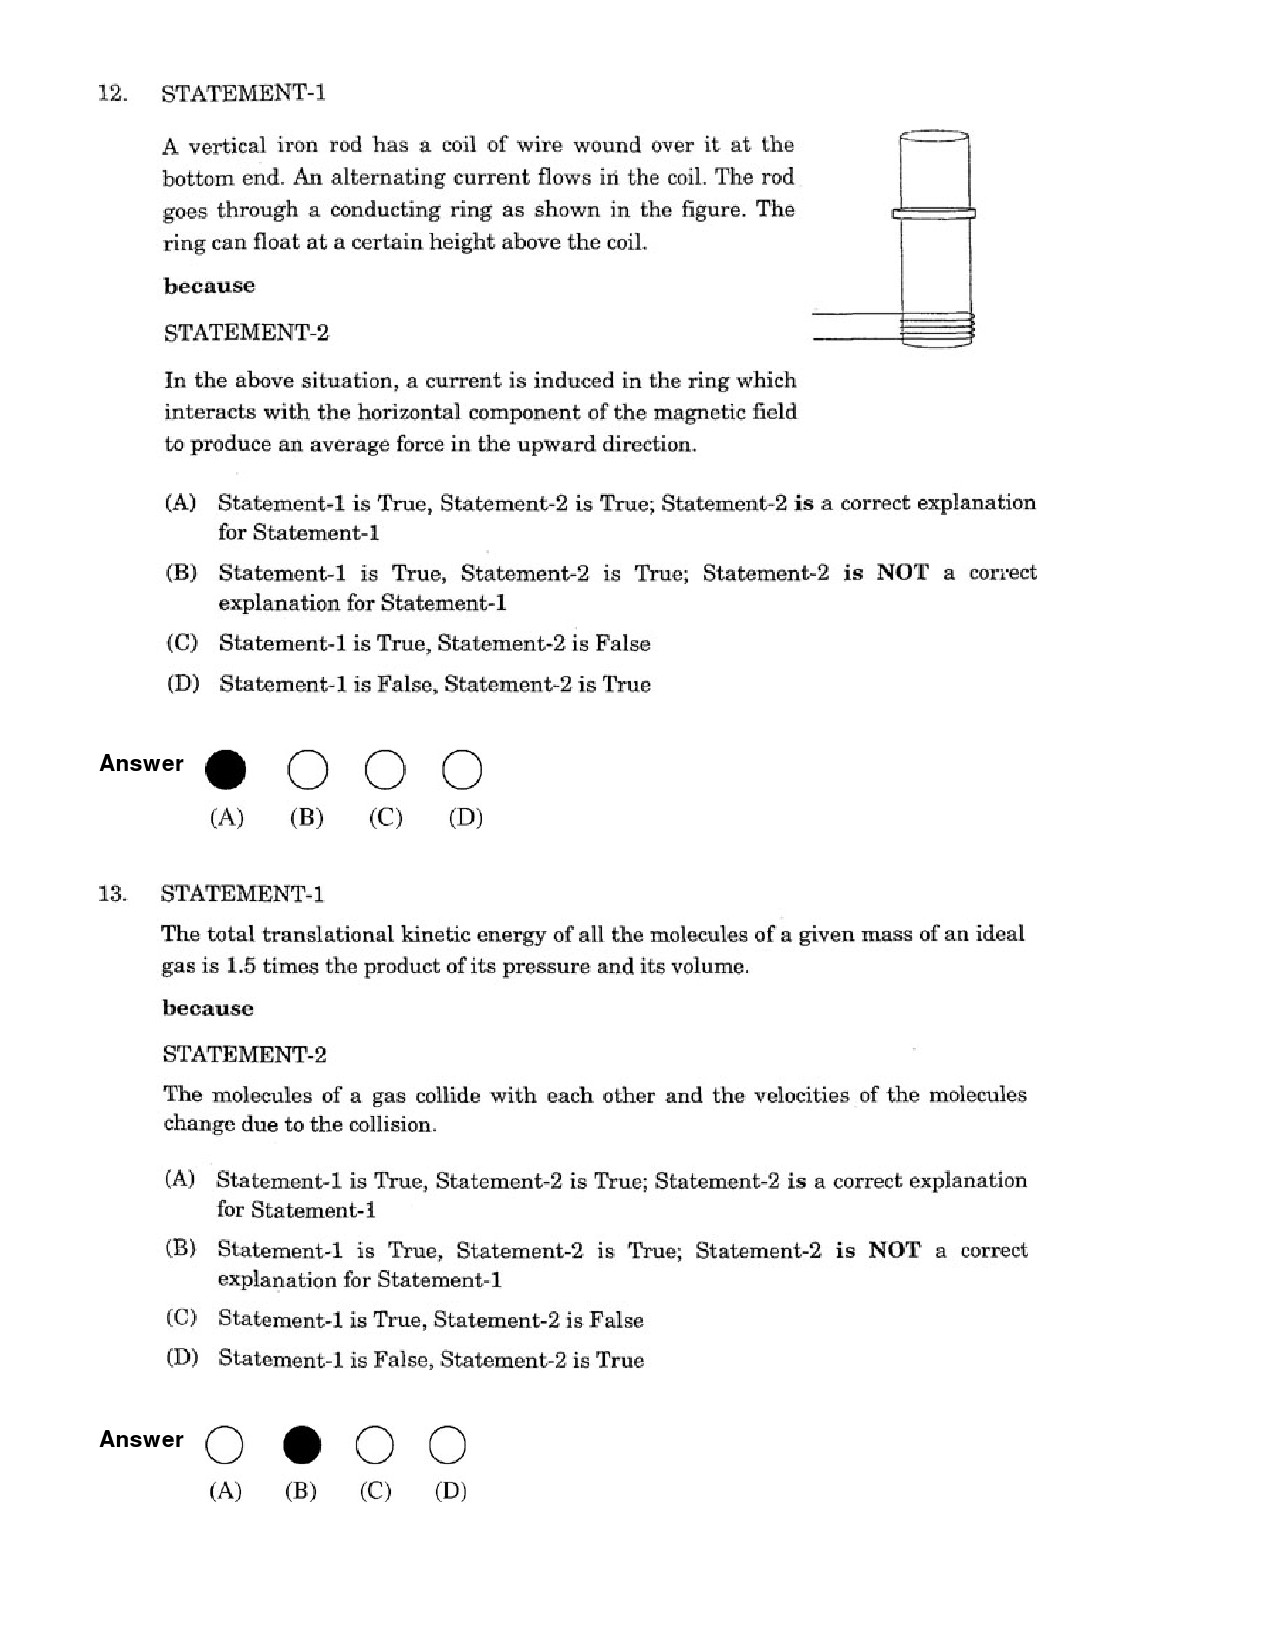 JEE Exam Question Paper 2007 Paper 2 6